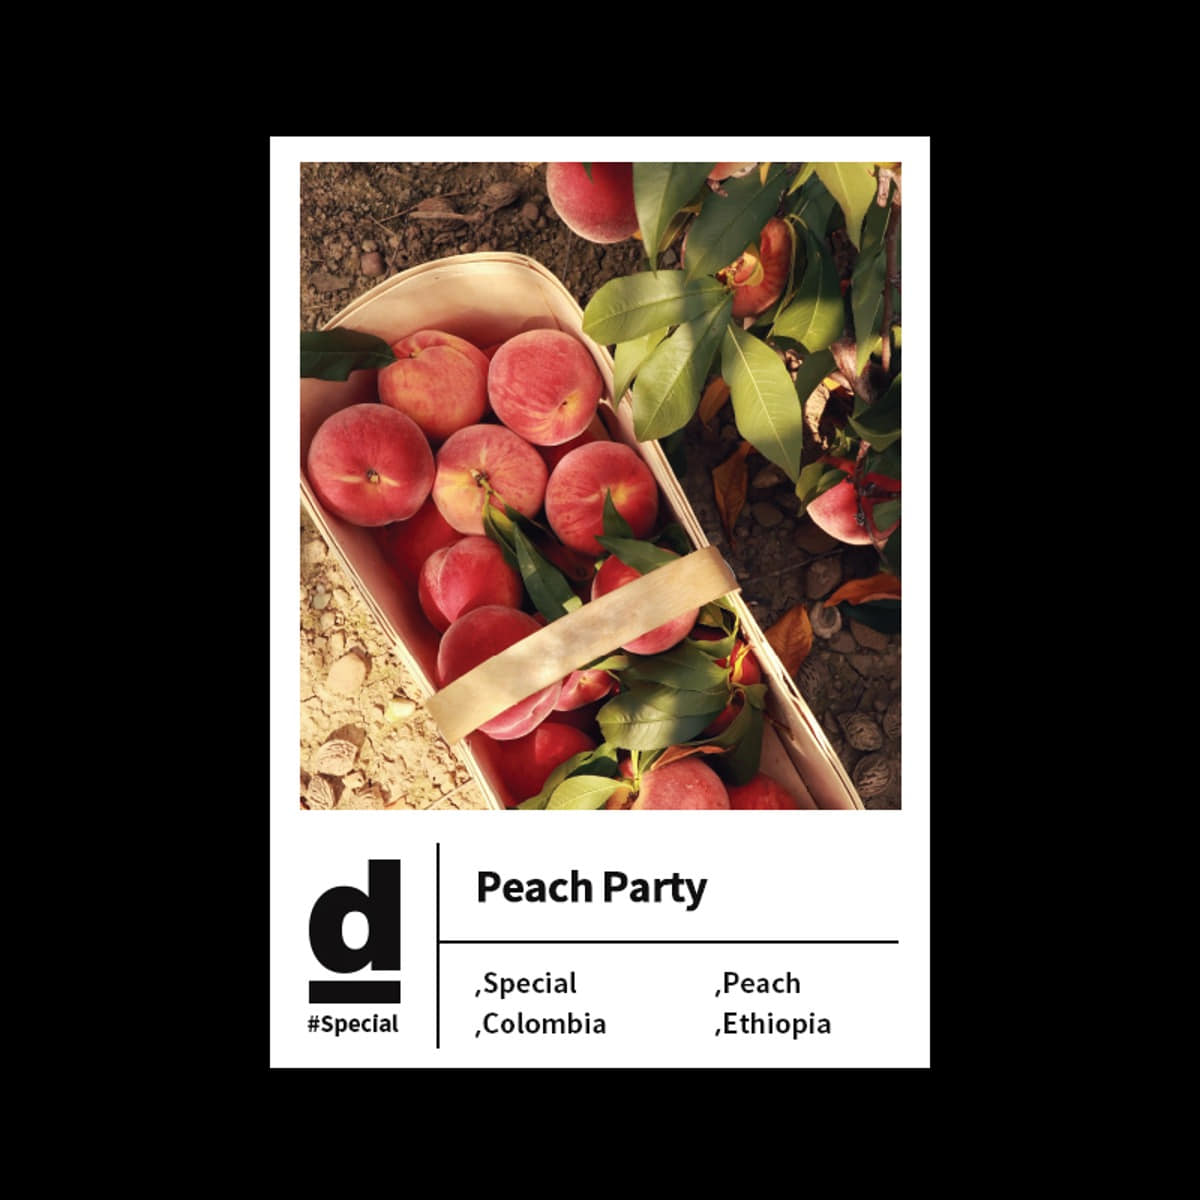 #Special - Peach Party